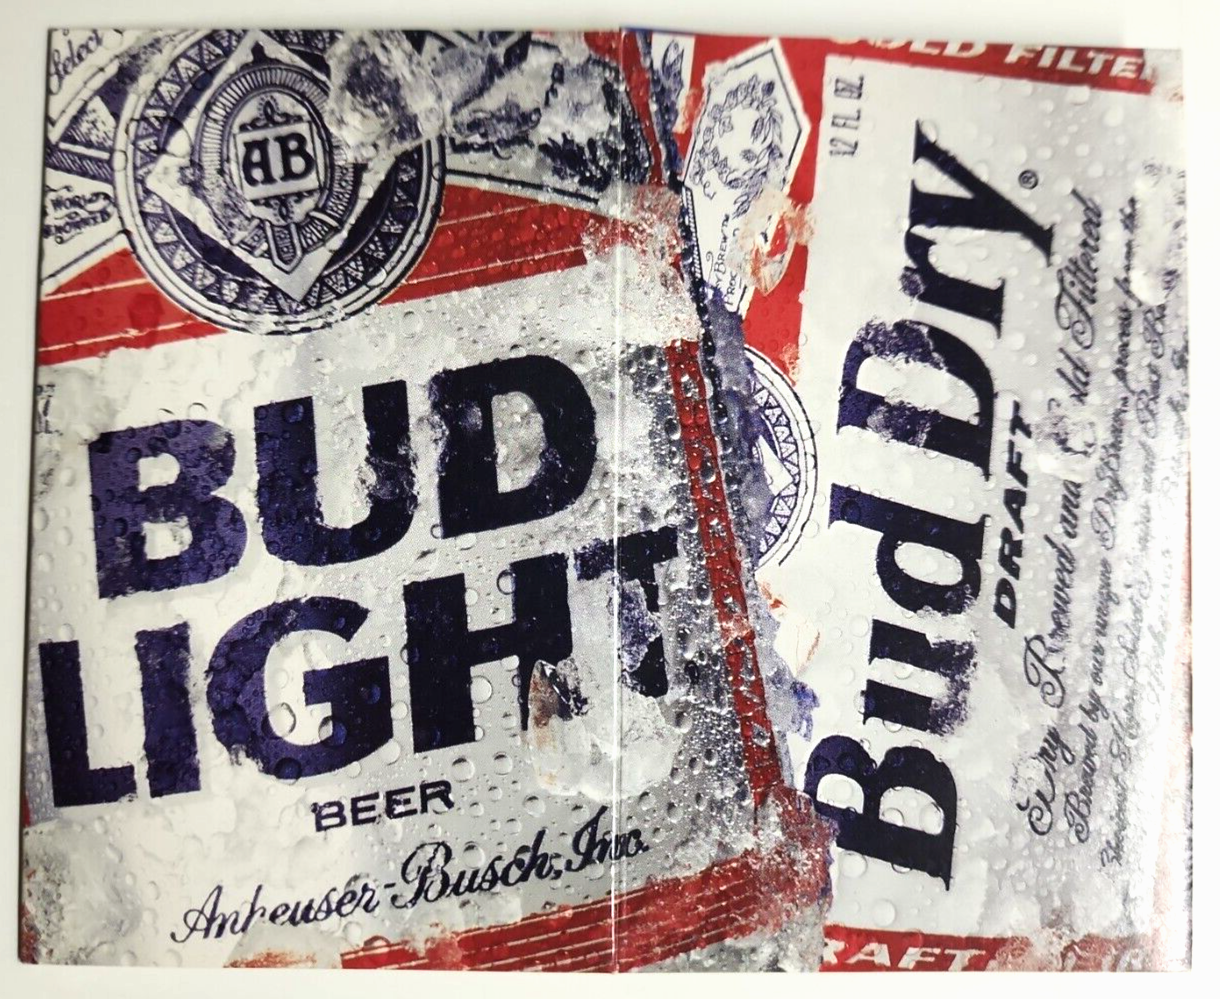 1993 Anheuser Busch Brewery Promo Tavern Tabletop Sign Bud Dry 6" x 5" PB58 - $12.99